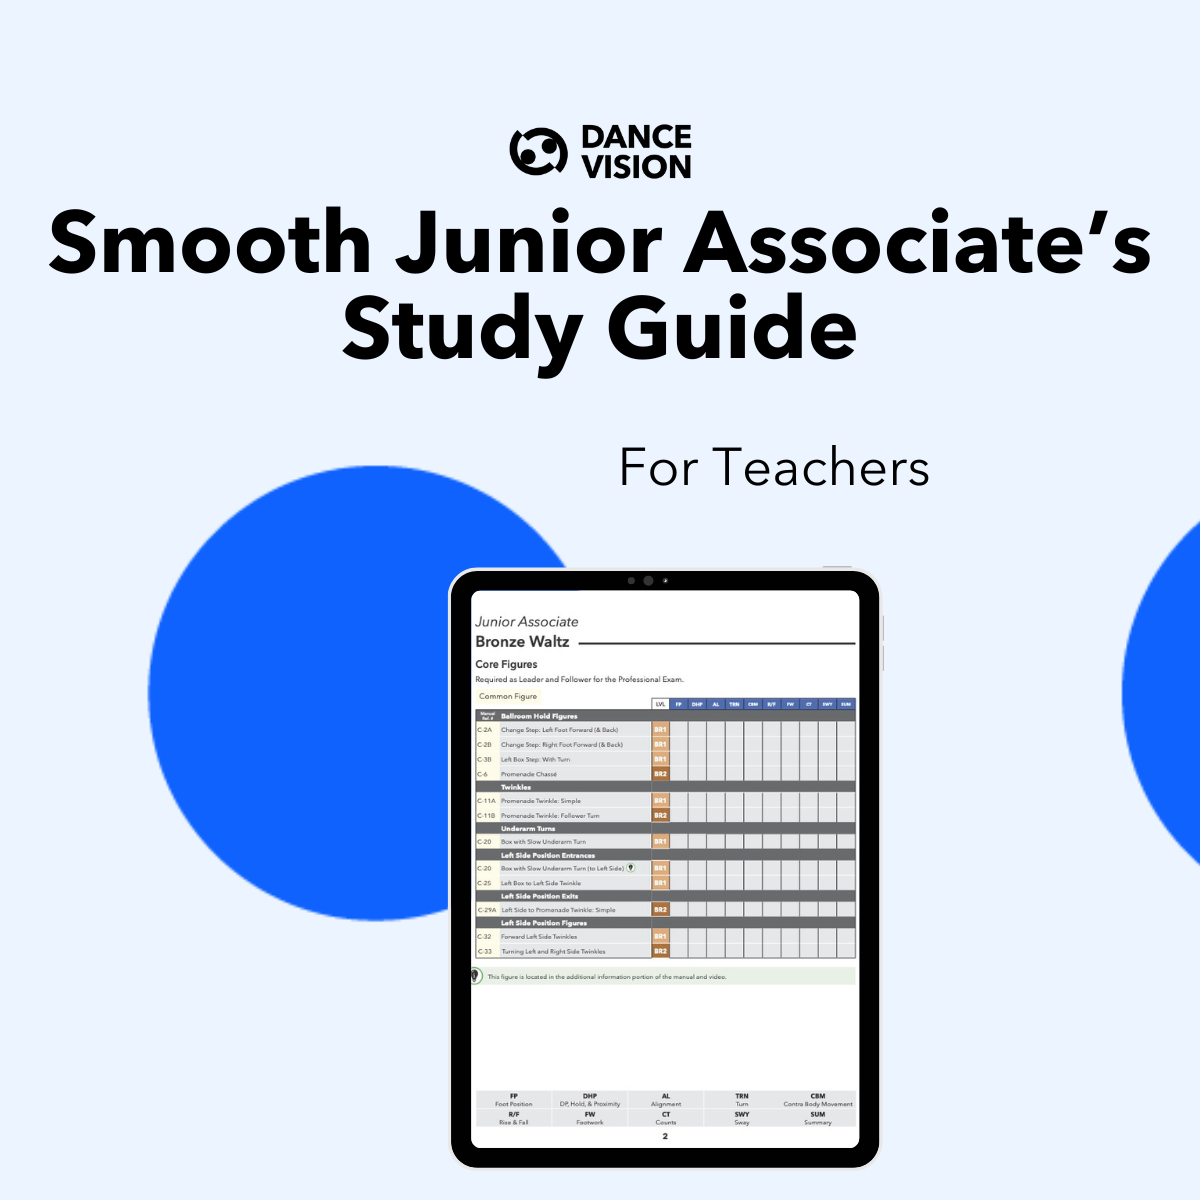 A free study guide for teachers to prepare for the Dance Vision American Smooth Junior Associate’s Certification.